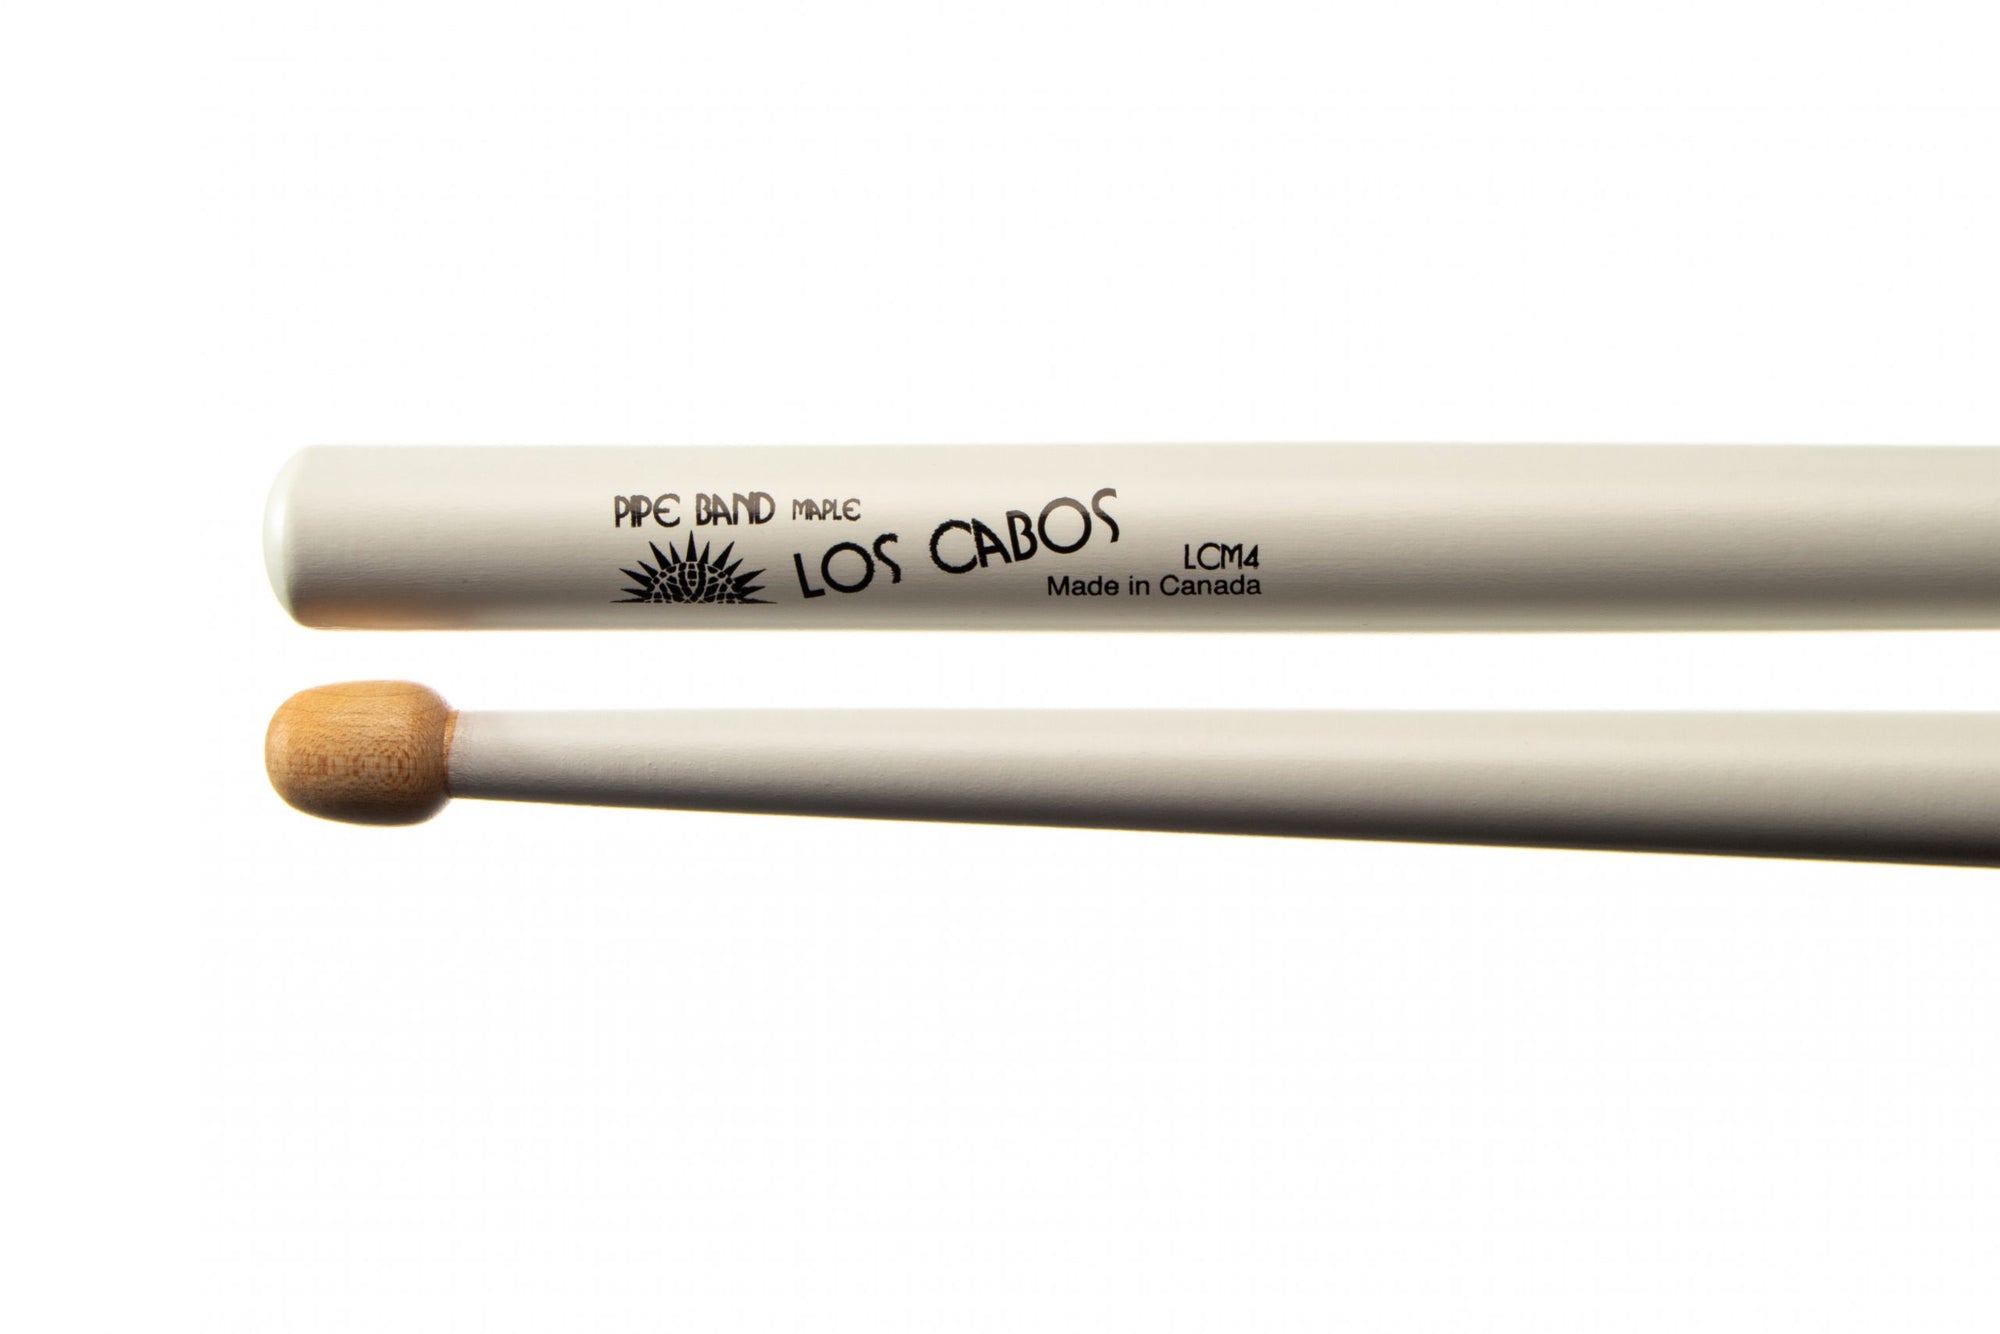 Los Cabos Pipe Band Sticks (Maple)